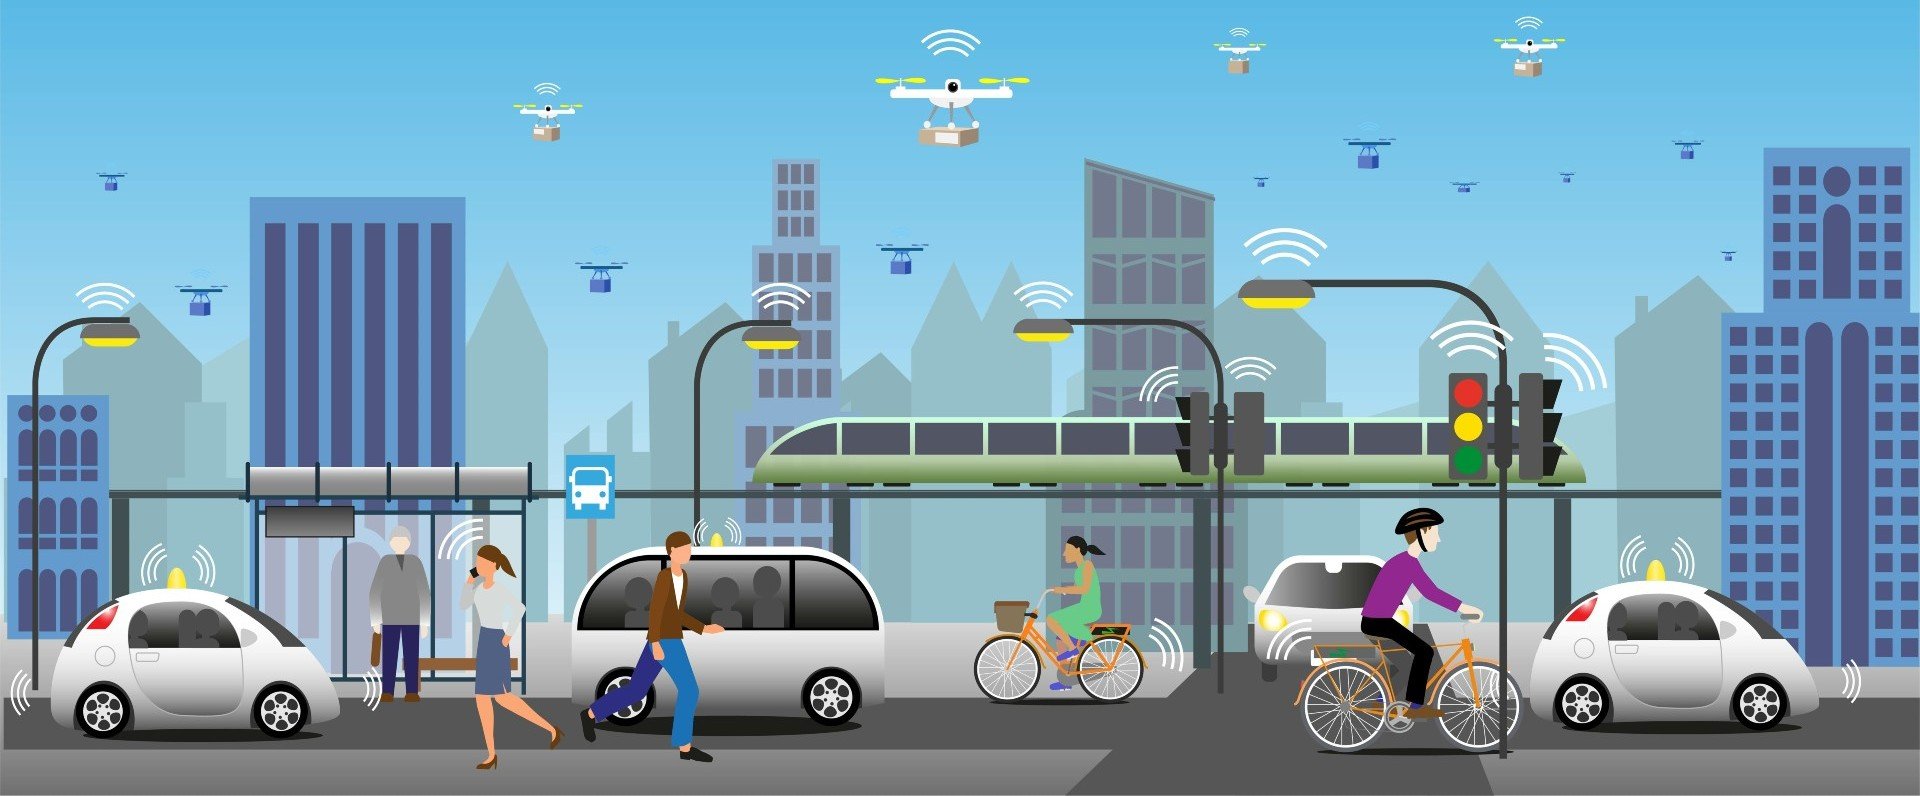 illustration of diverse residents and transport in urban mobility landscape